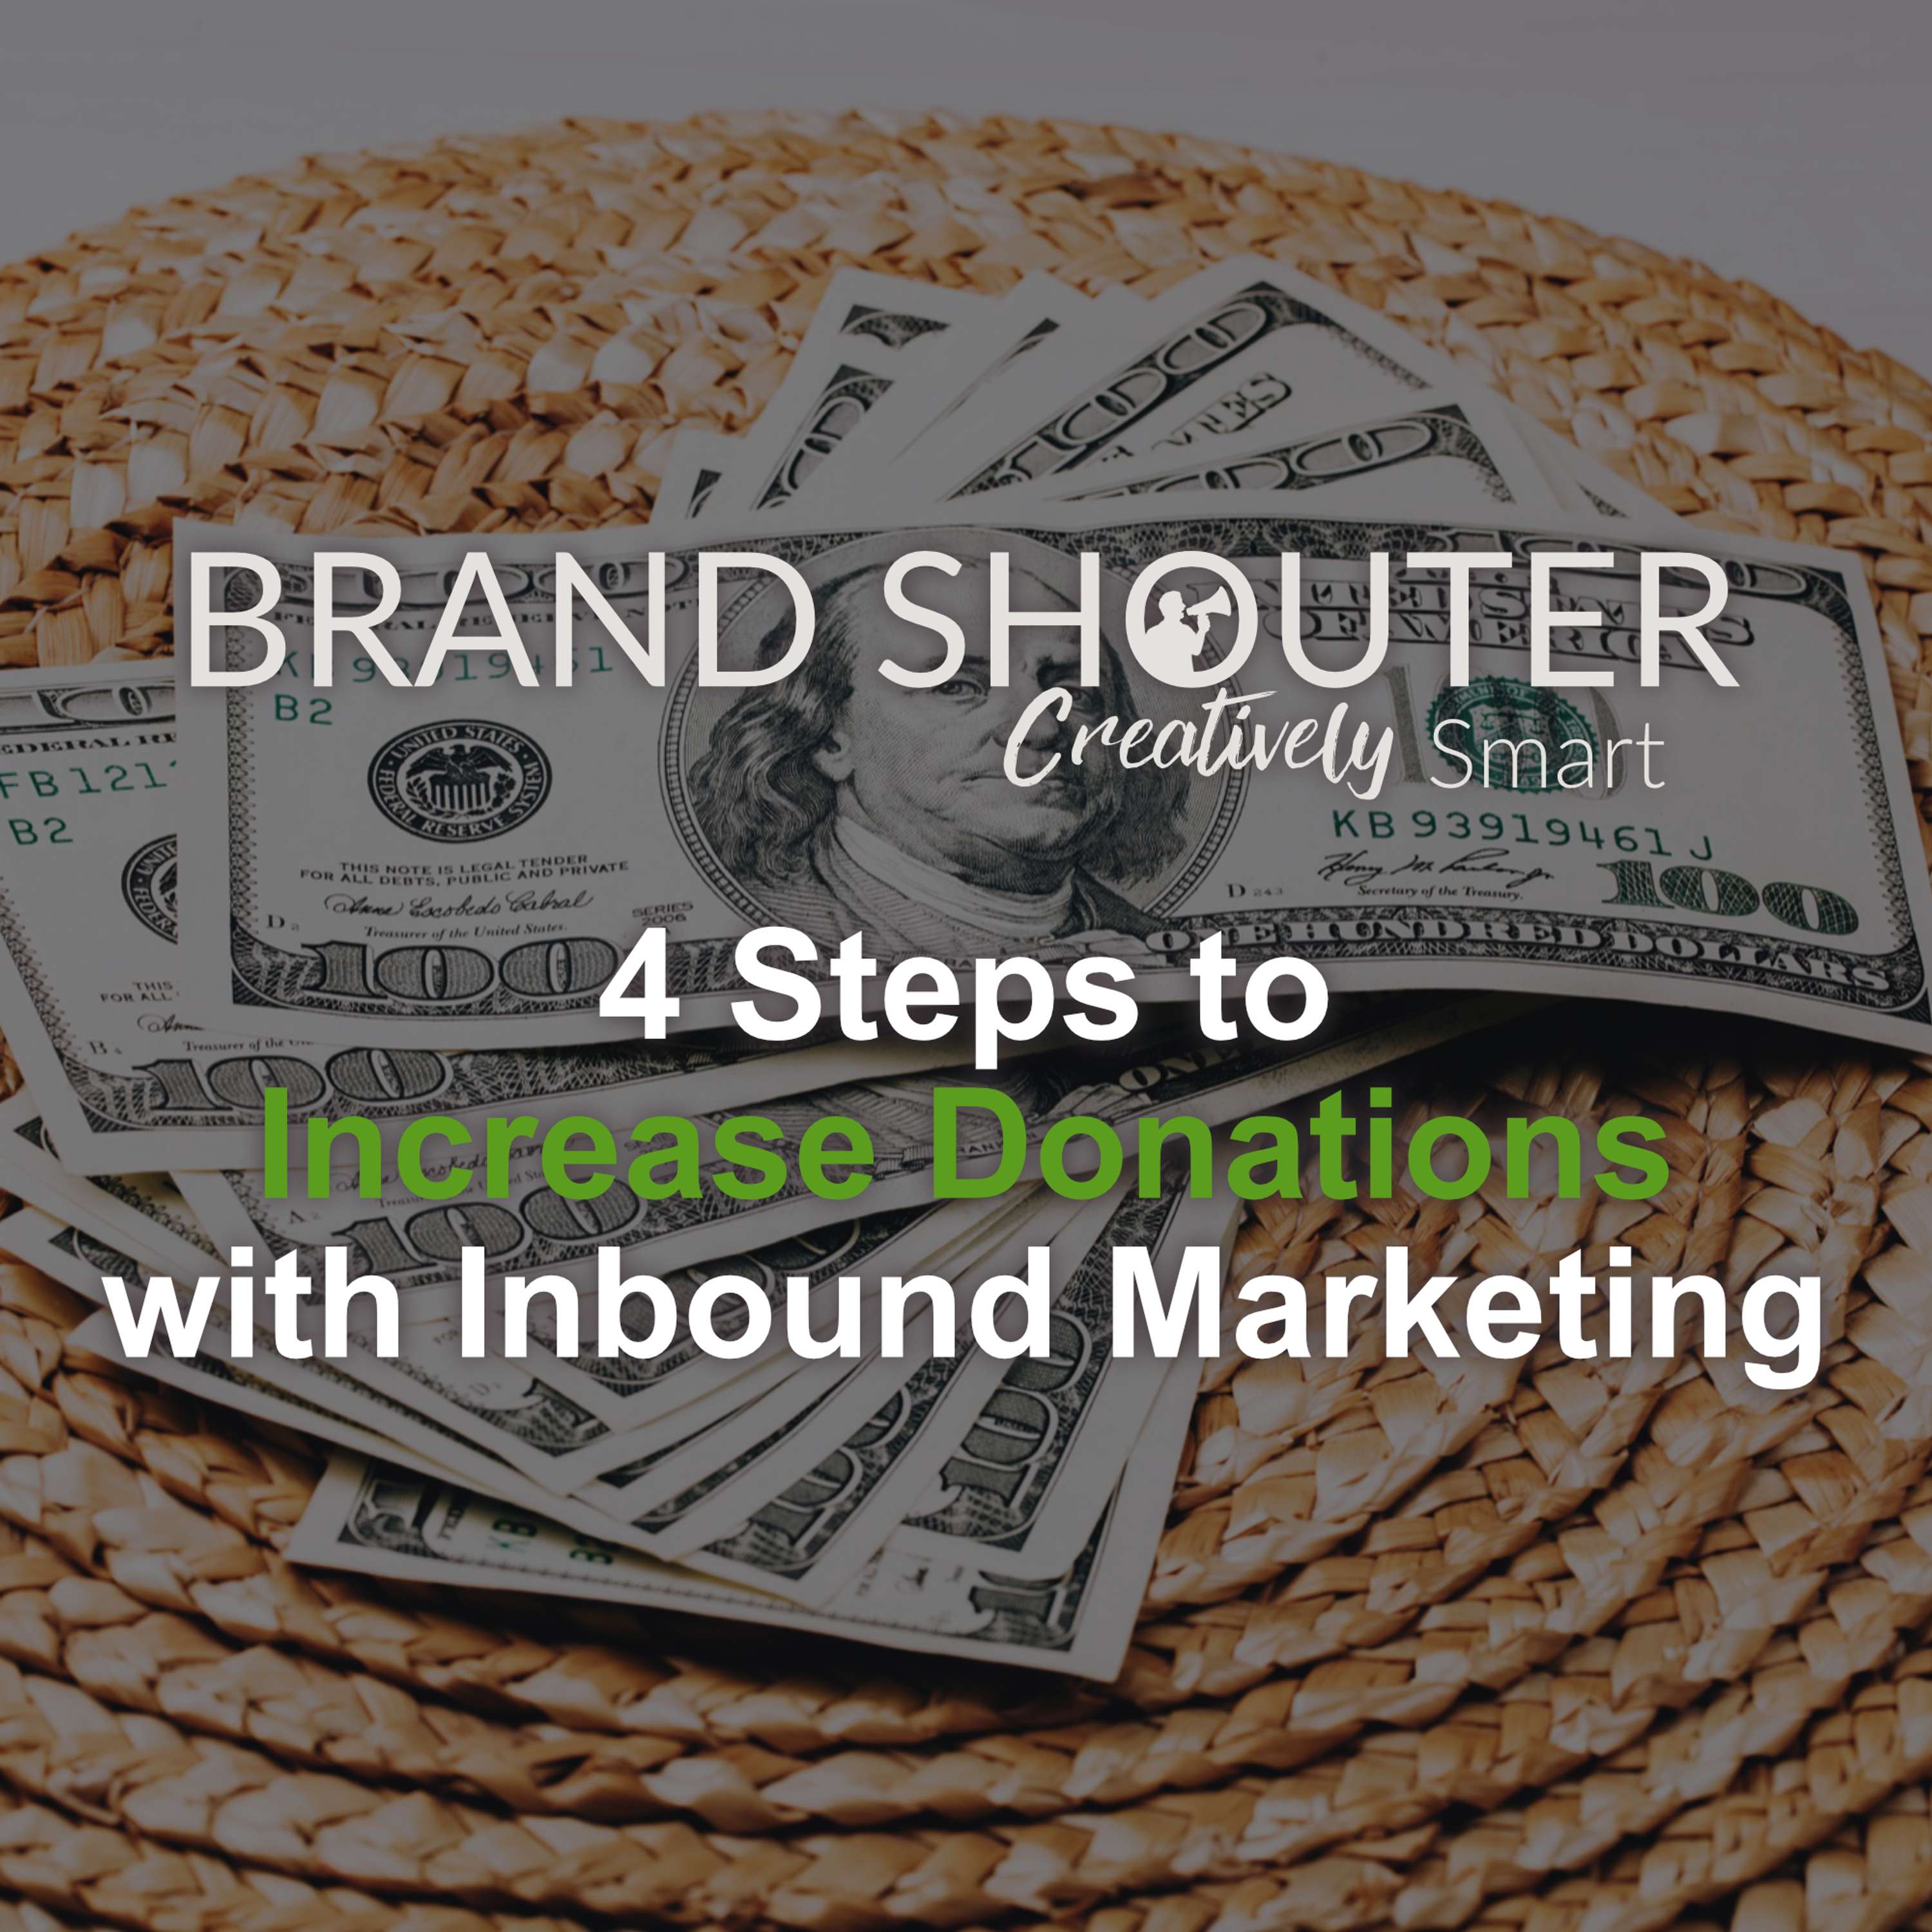 4 Steps to Increase Donations with Inbound Marketing